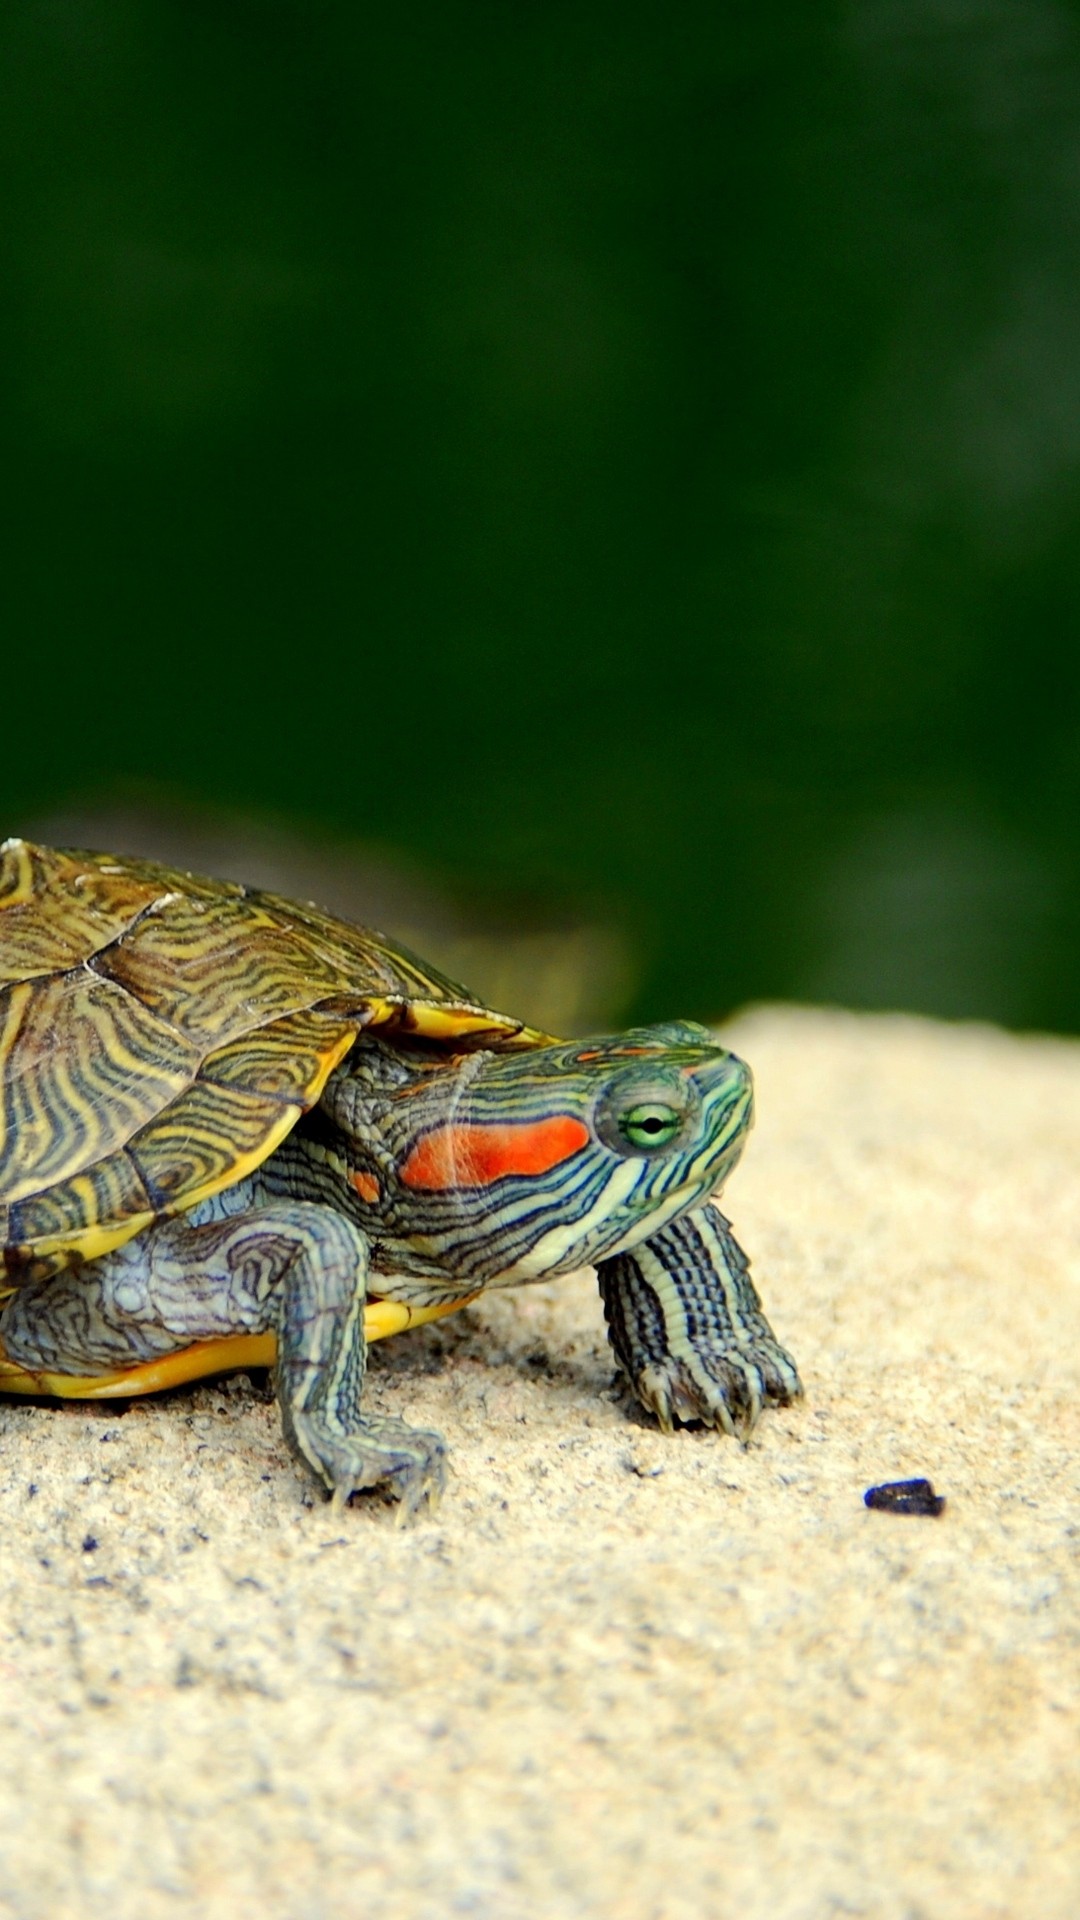 Turtle wallpaper for android